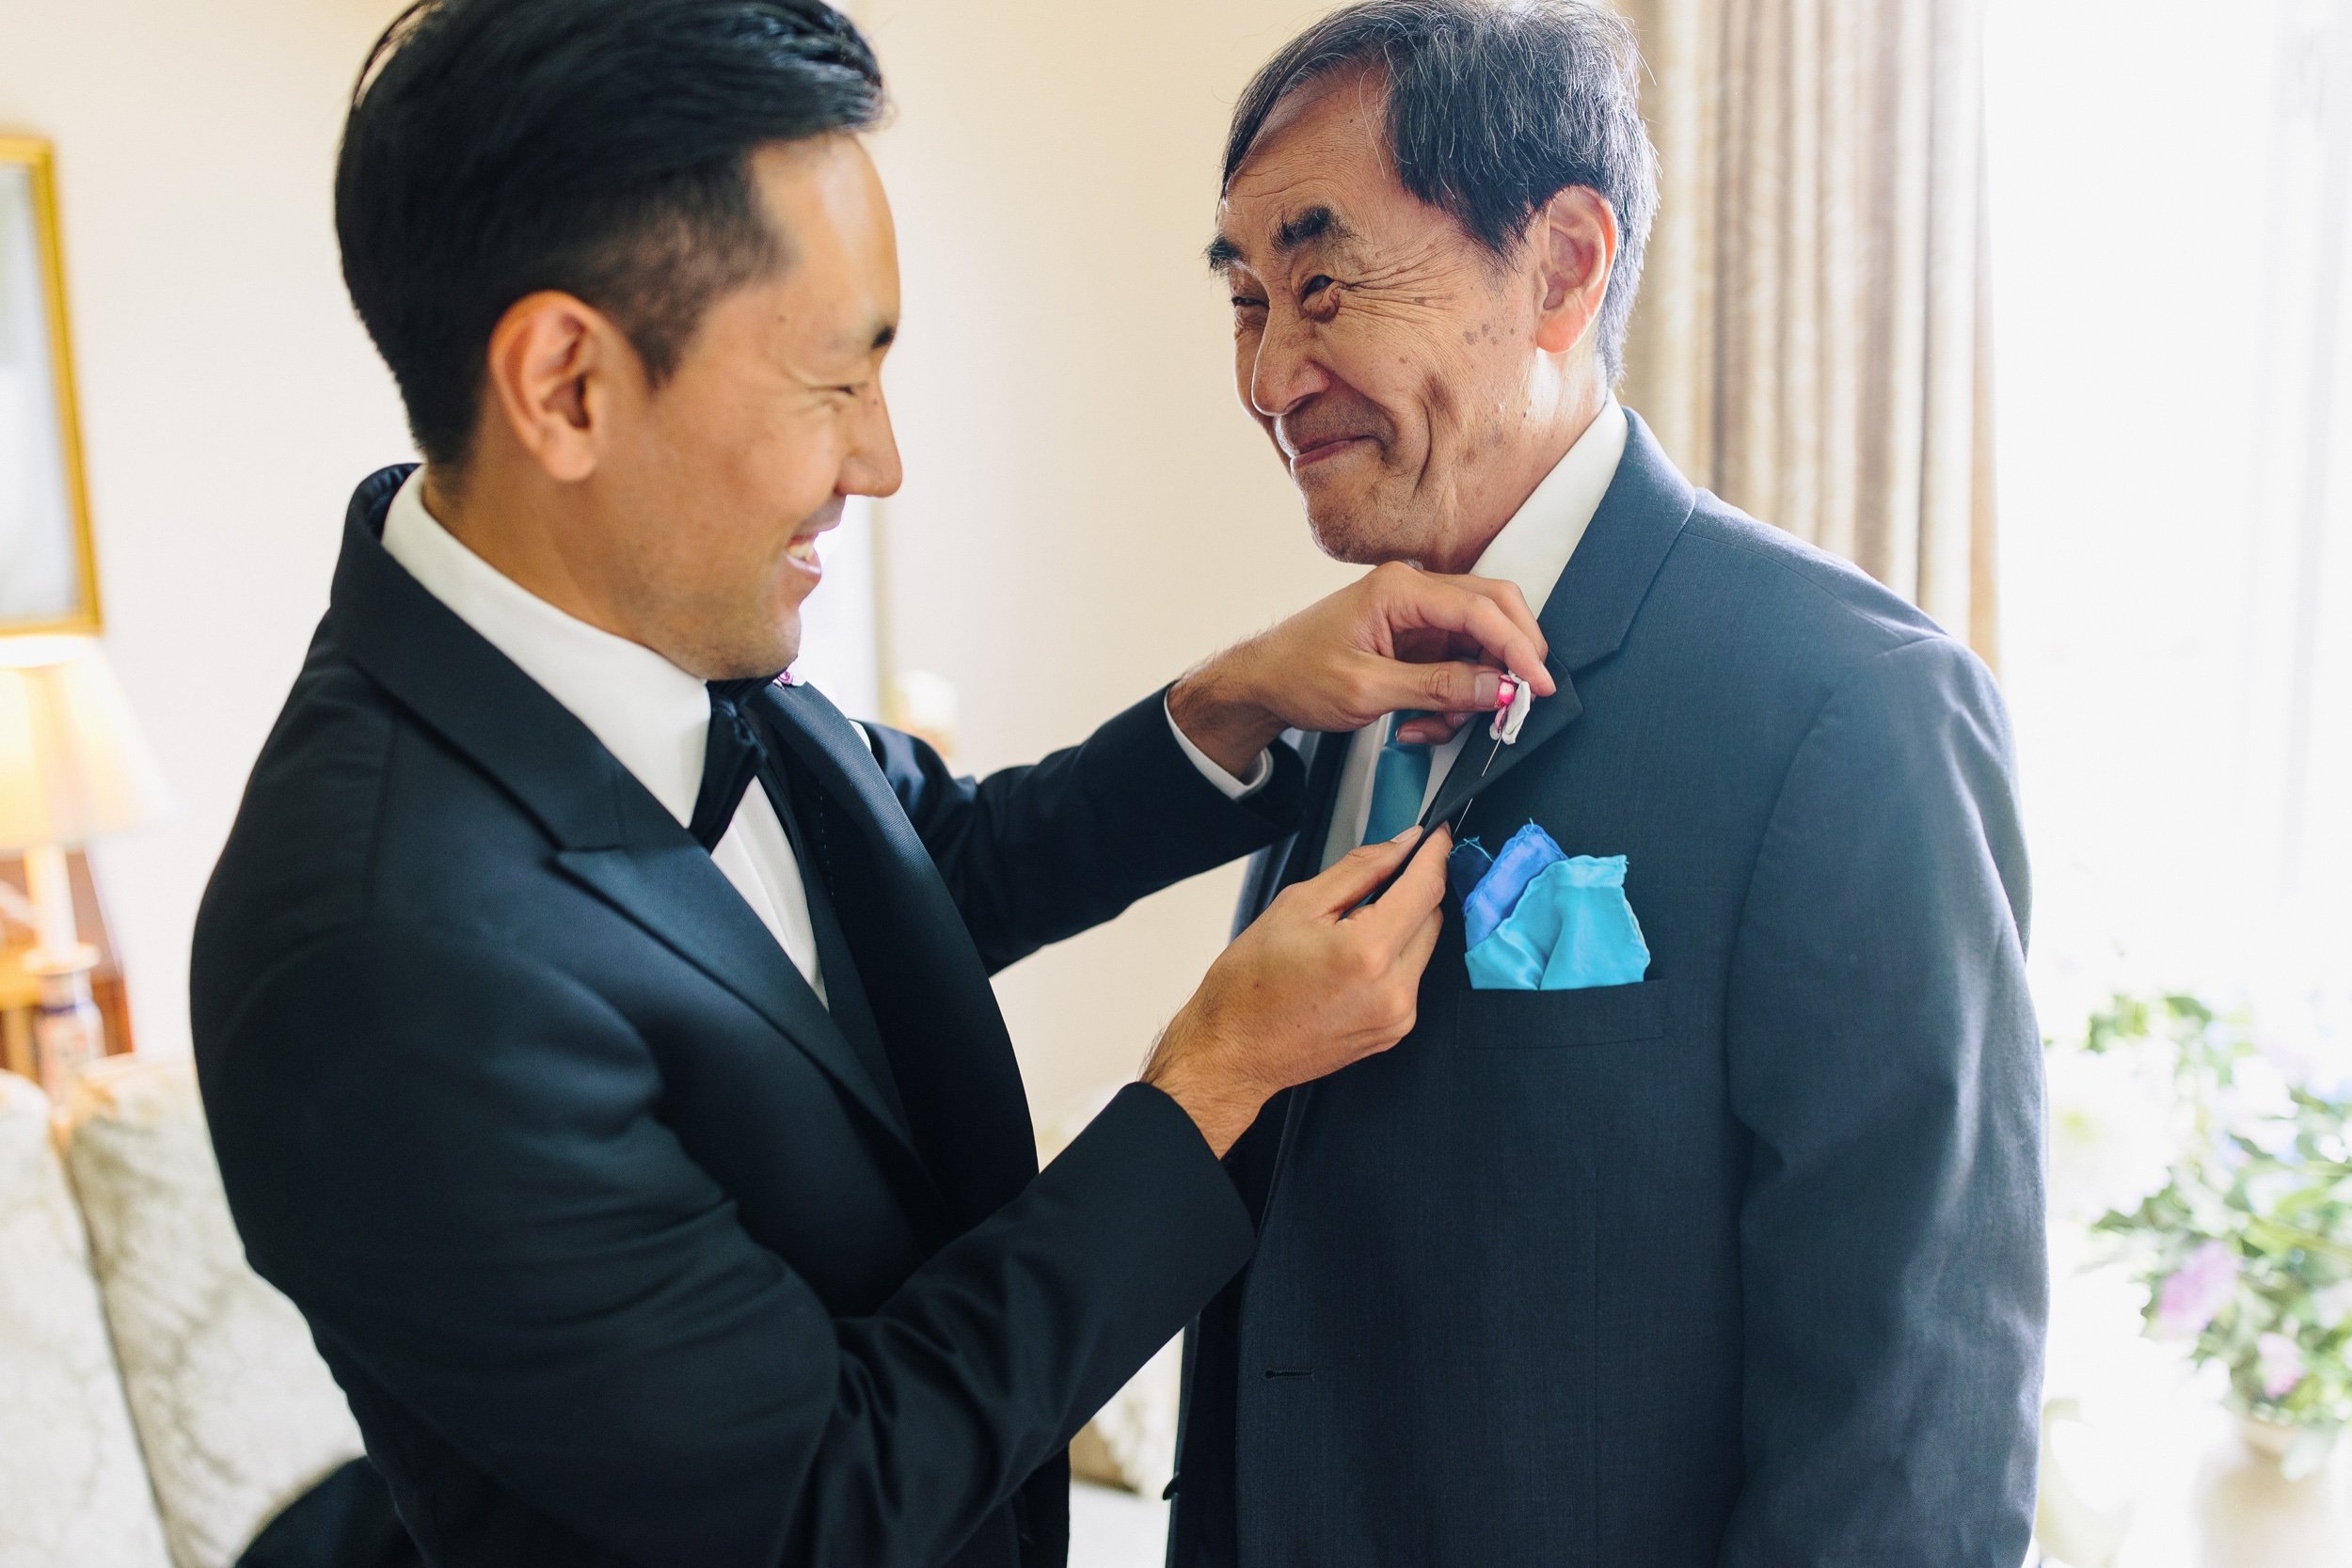 02_Groom and dad moment.jpg